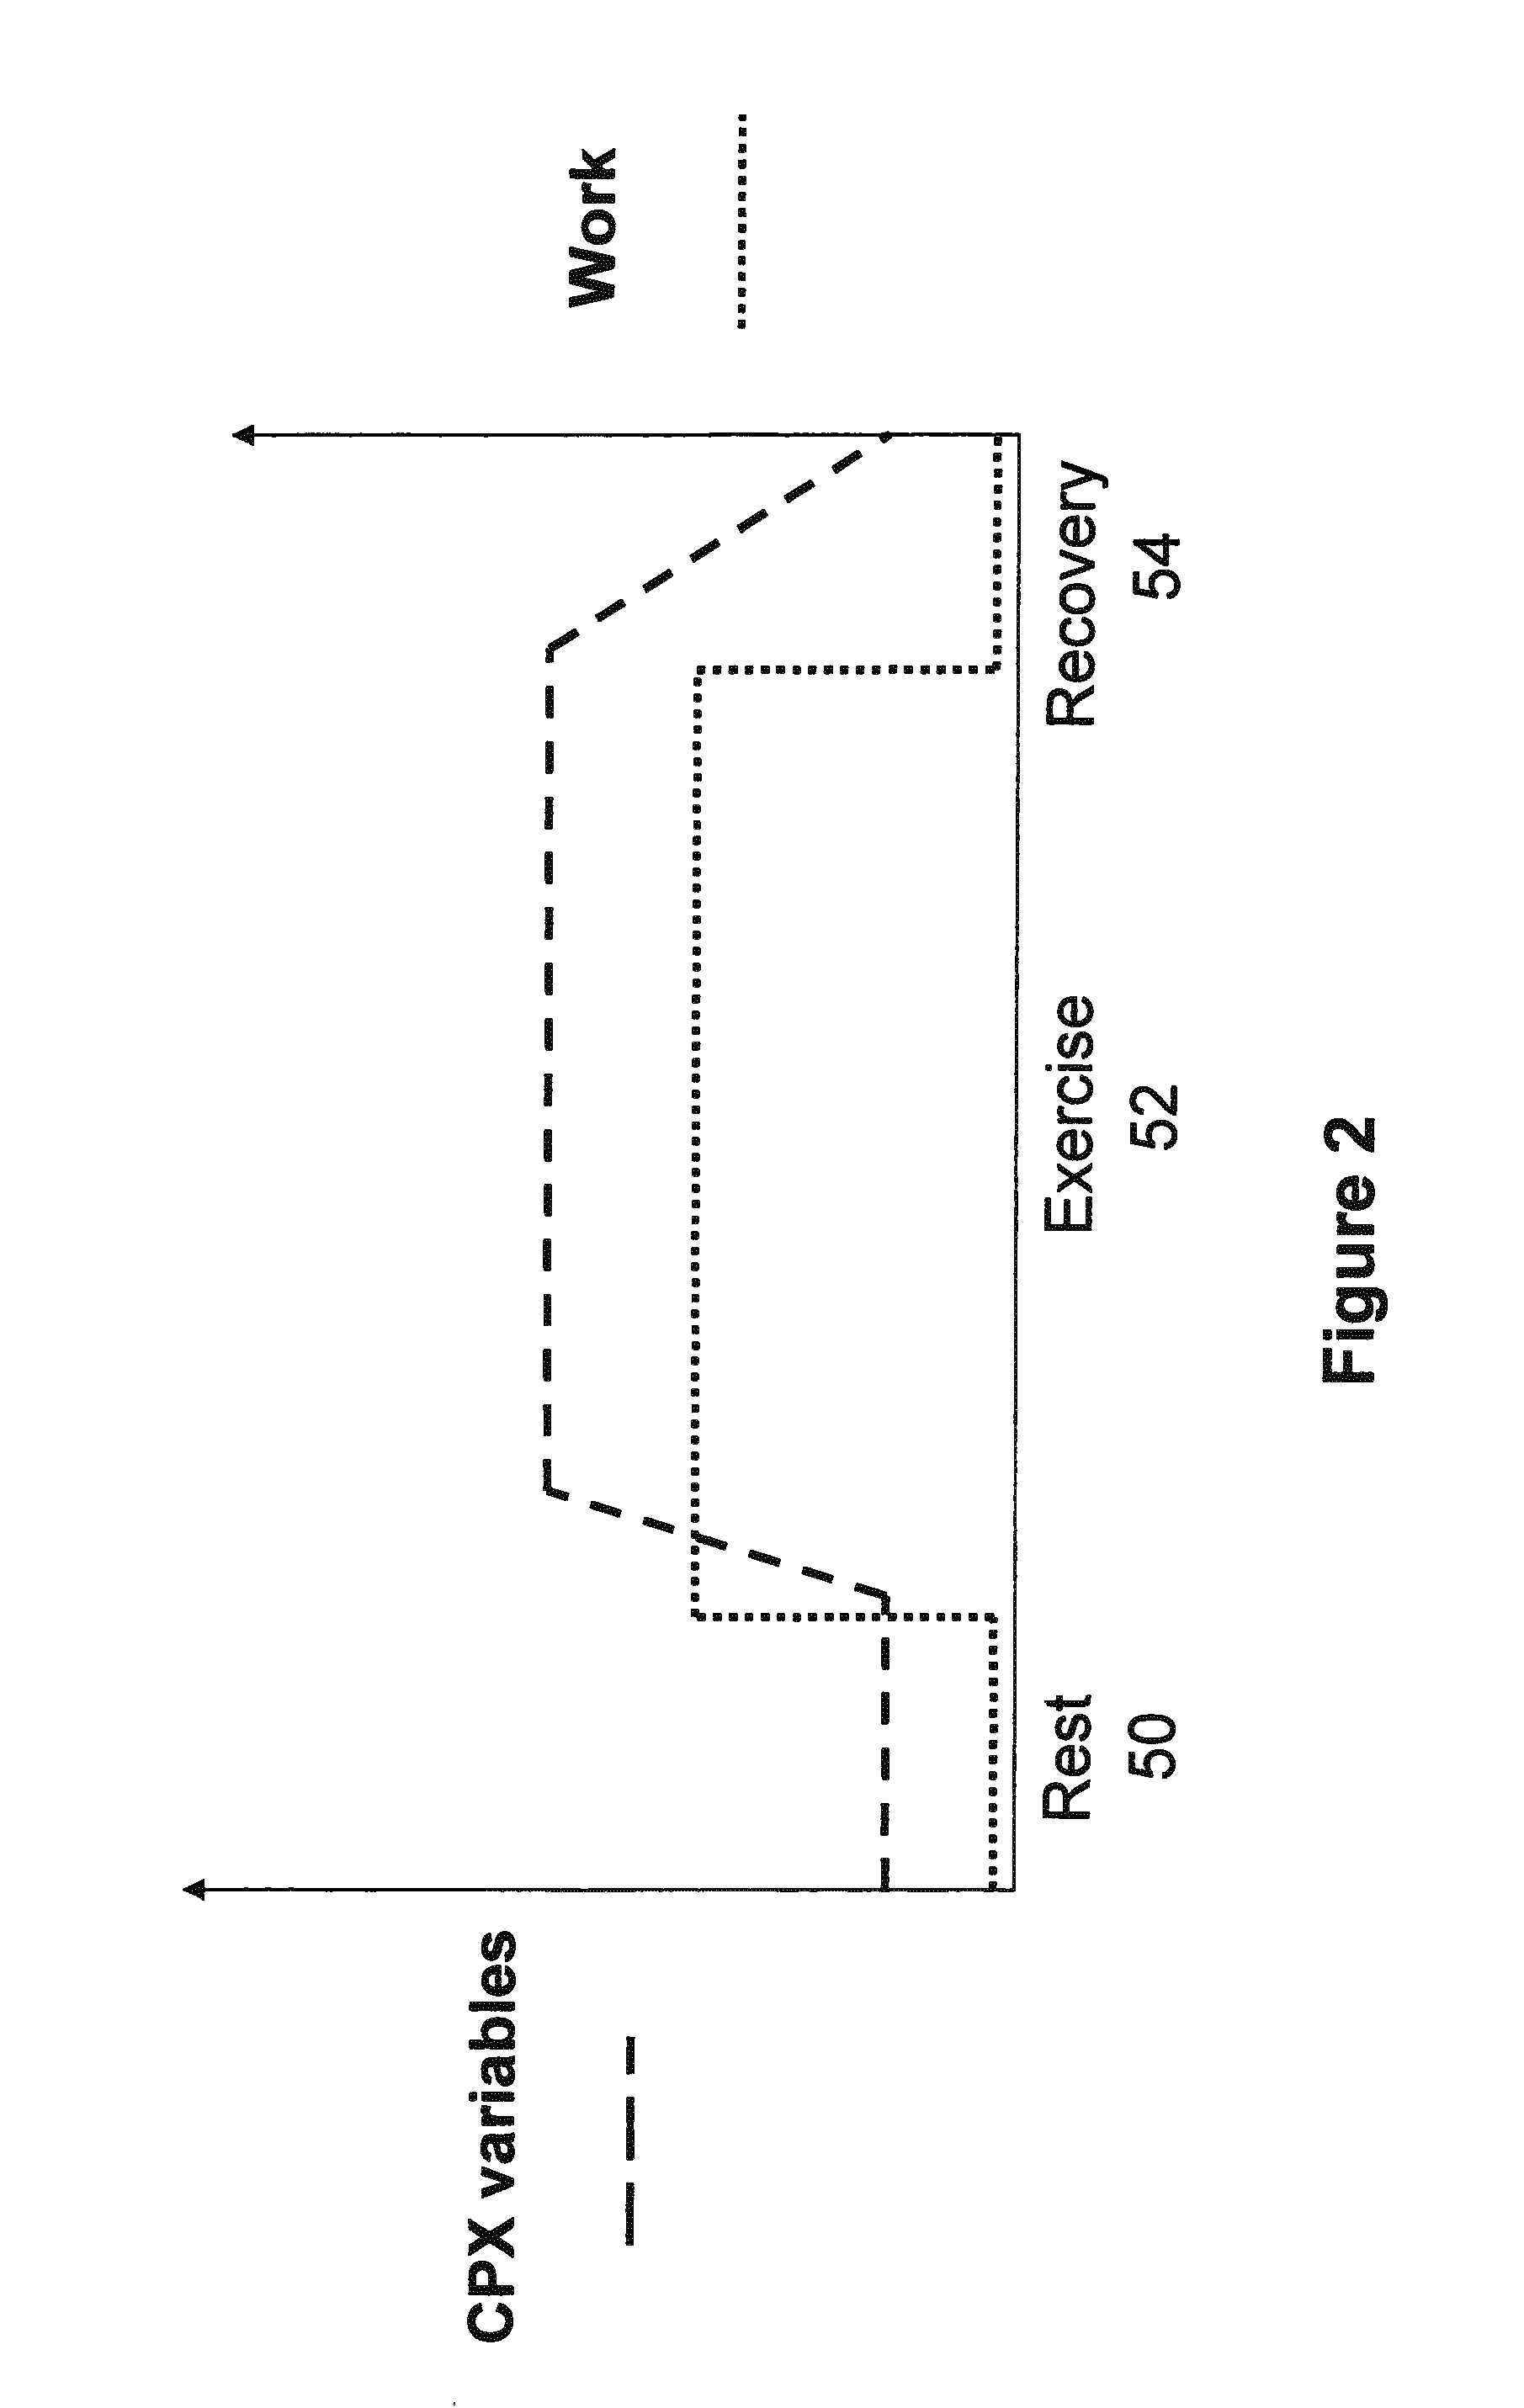 Pattern recognition system for classifying the functional status of patients with pulmonary hypertension, including pulmonary arterial and pulmonary vascular hypertension